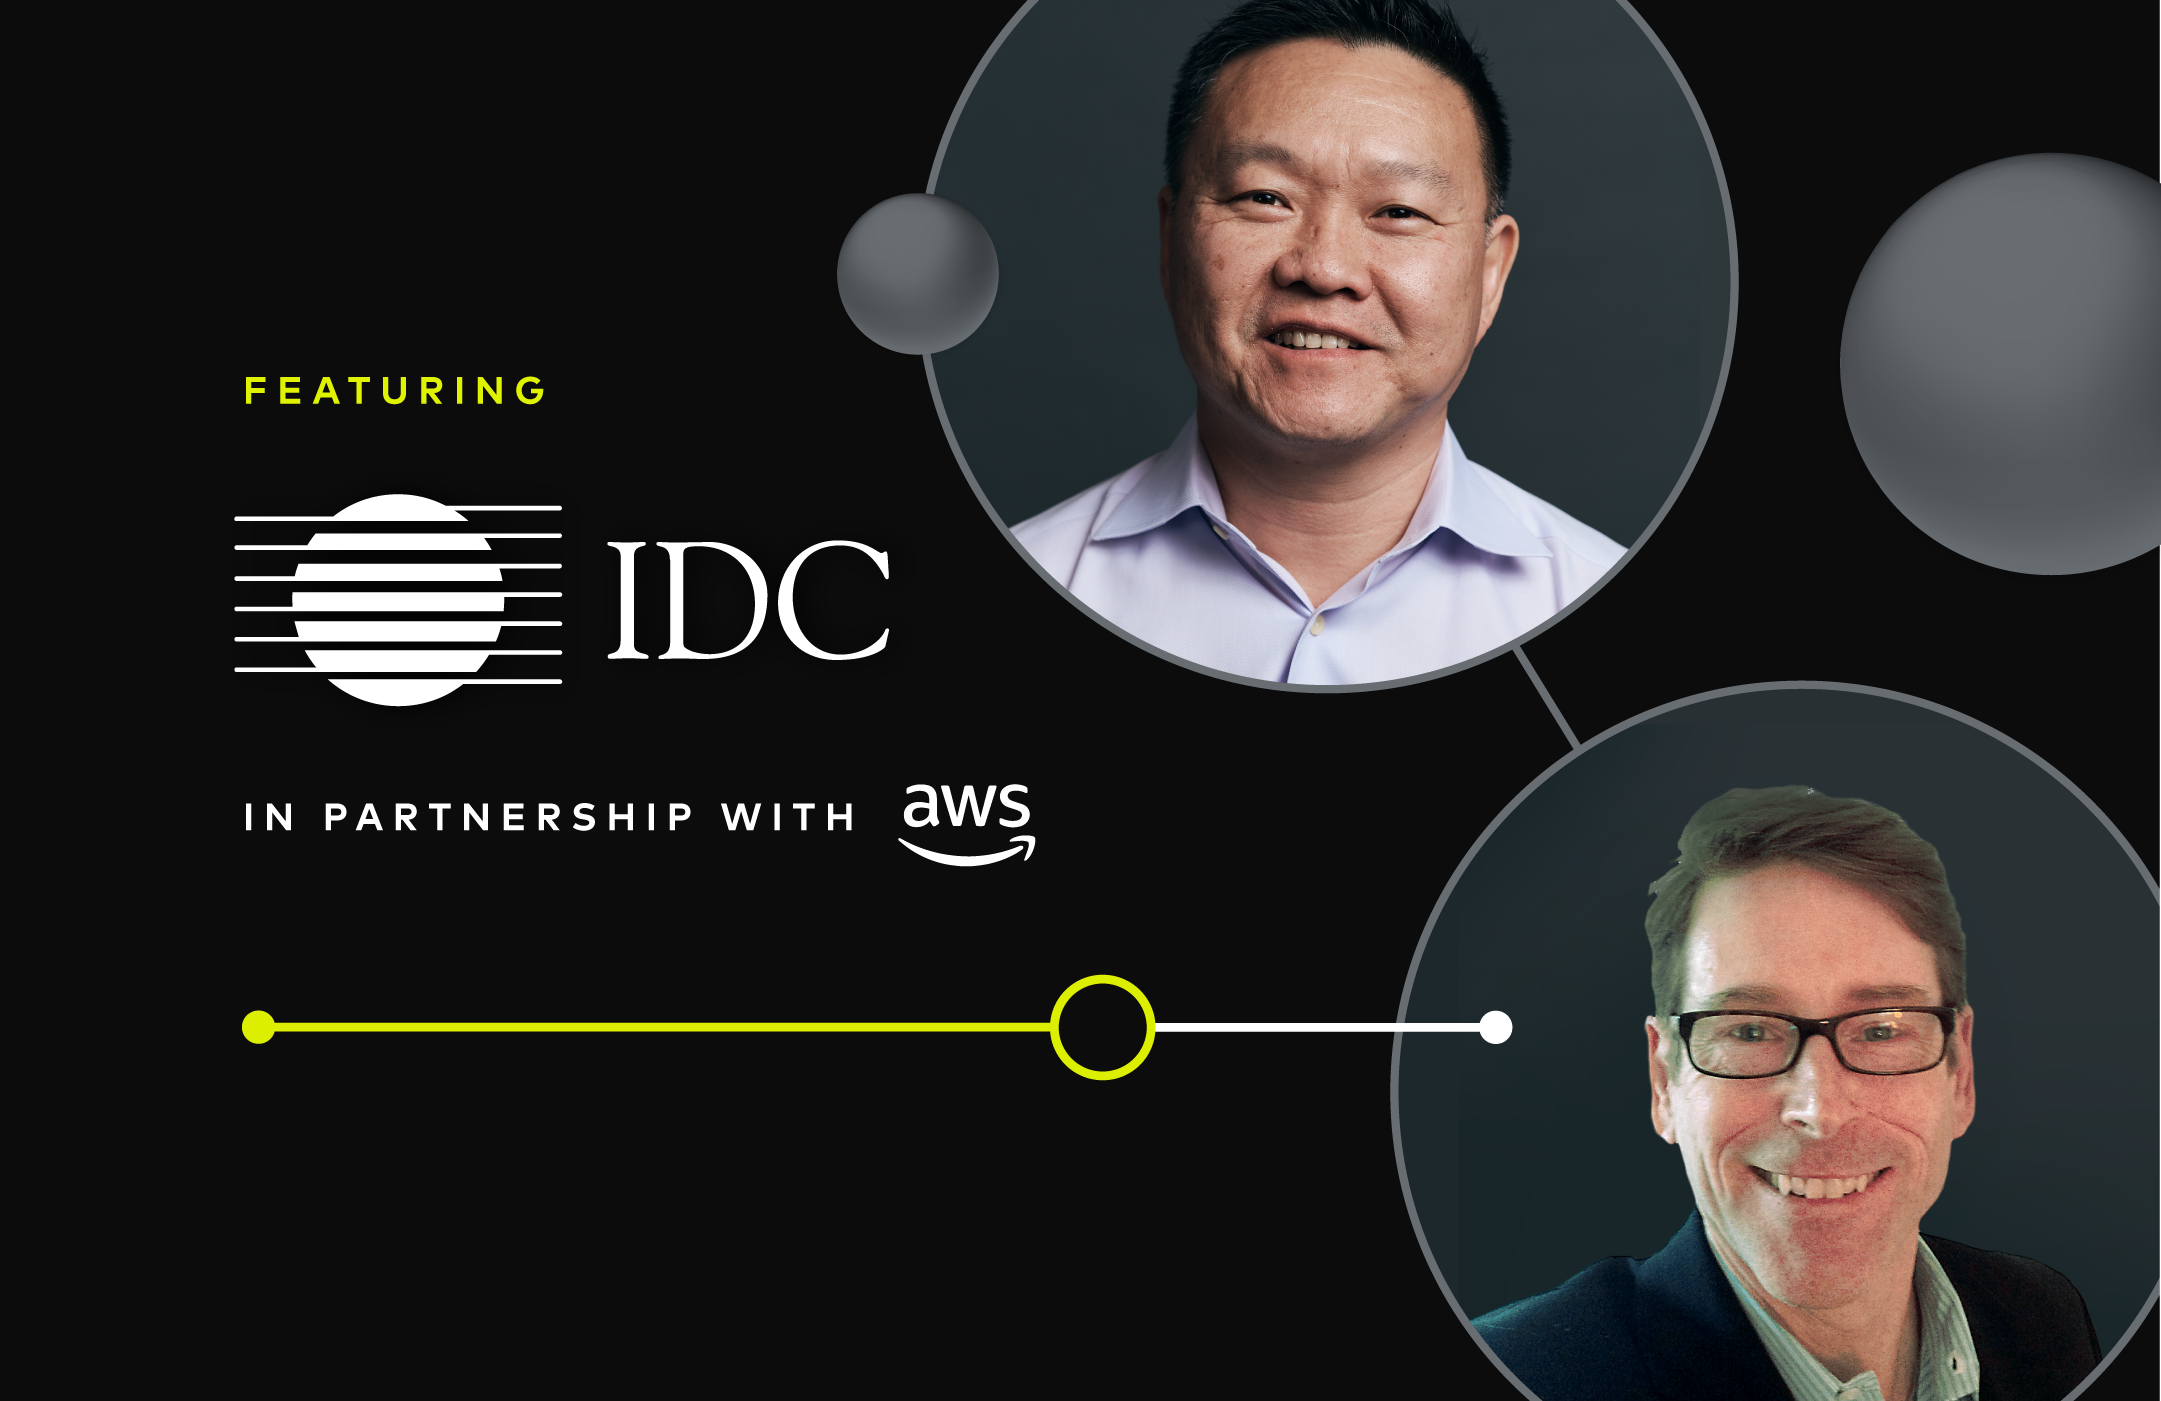 Featuring IDC in partnership with AWS